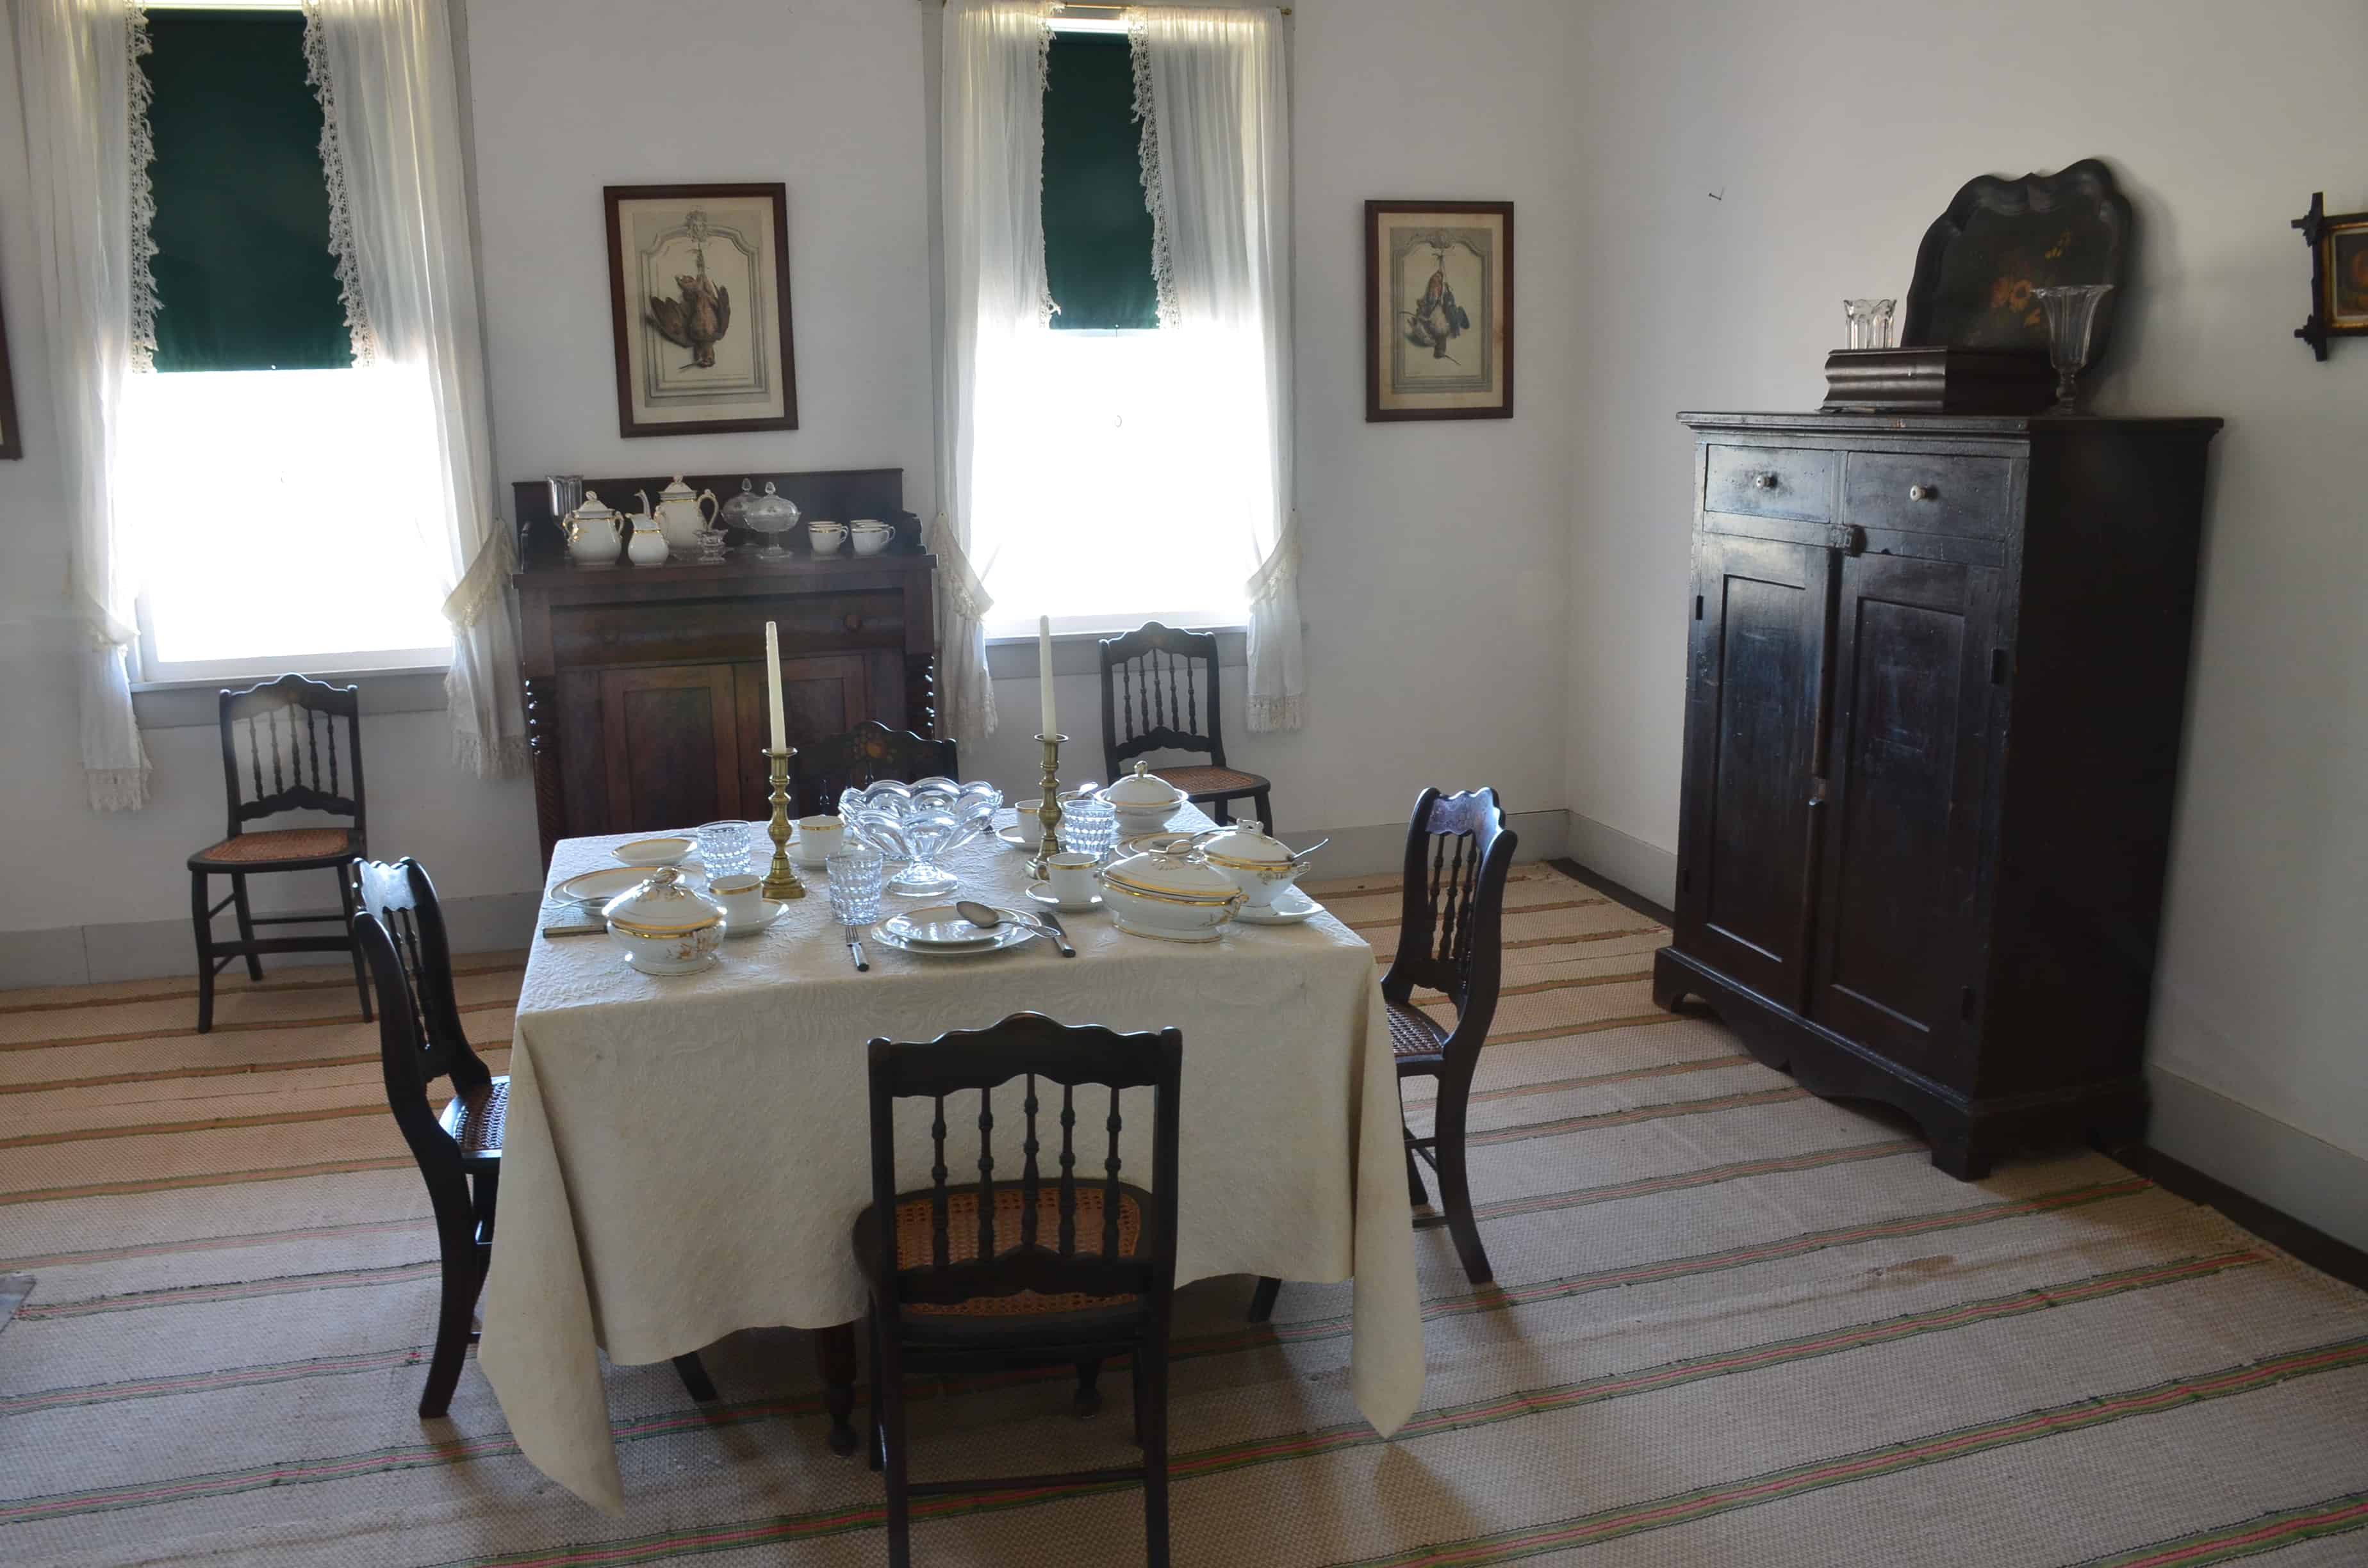 Captain's quarters at Fort Laramie National Historic Site in Wyoming